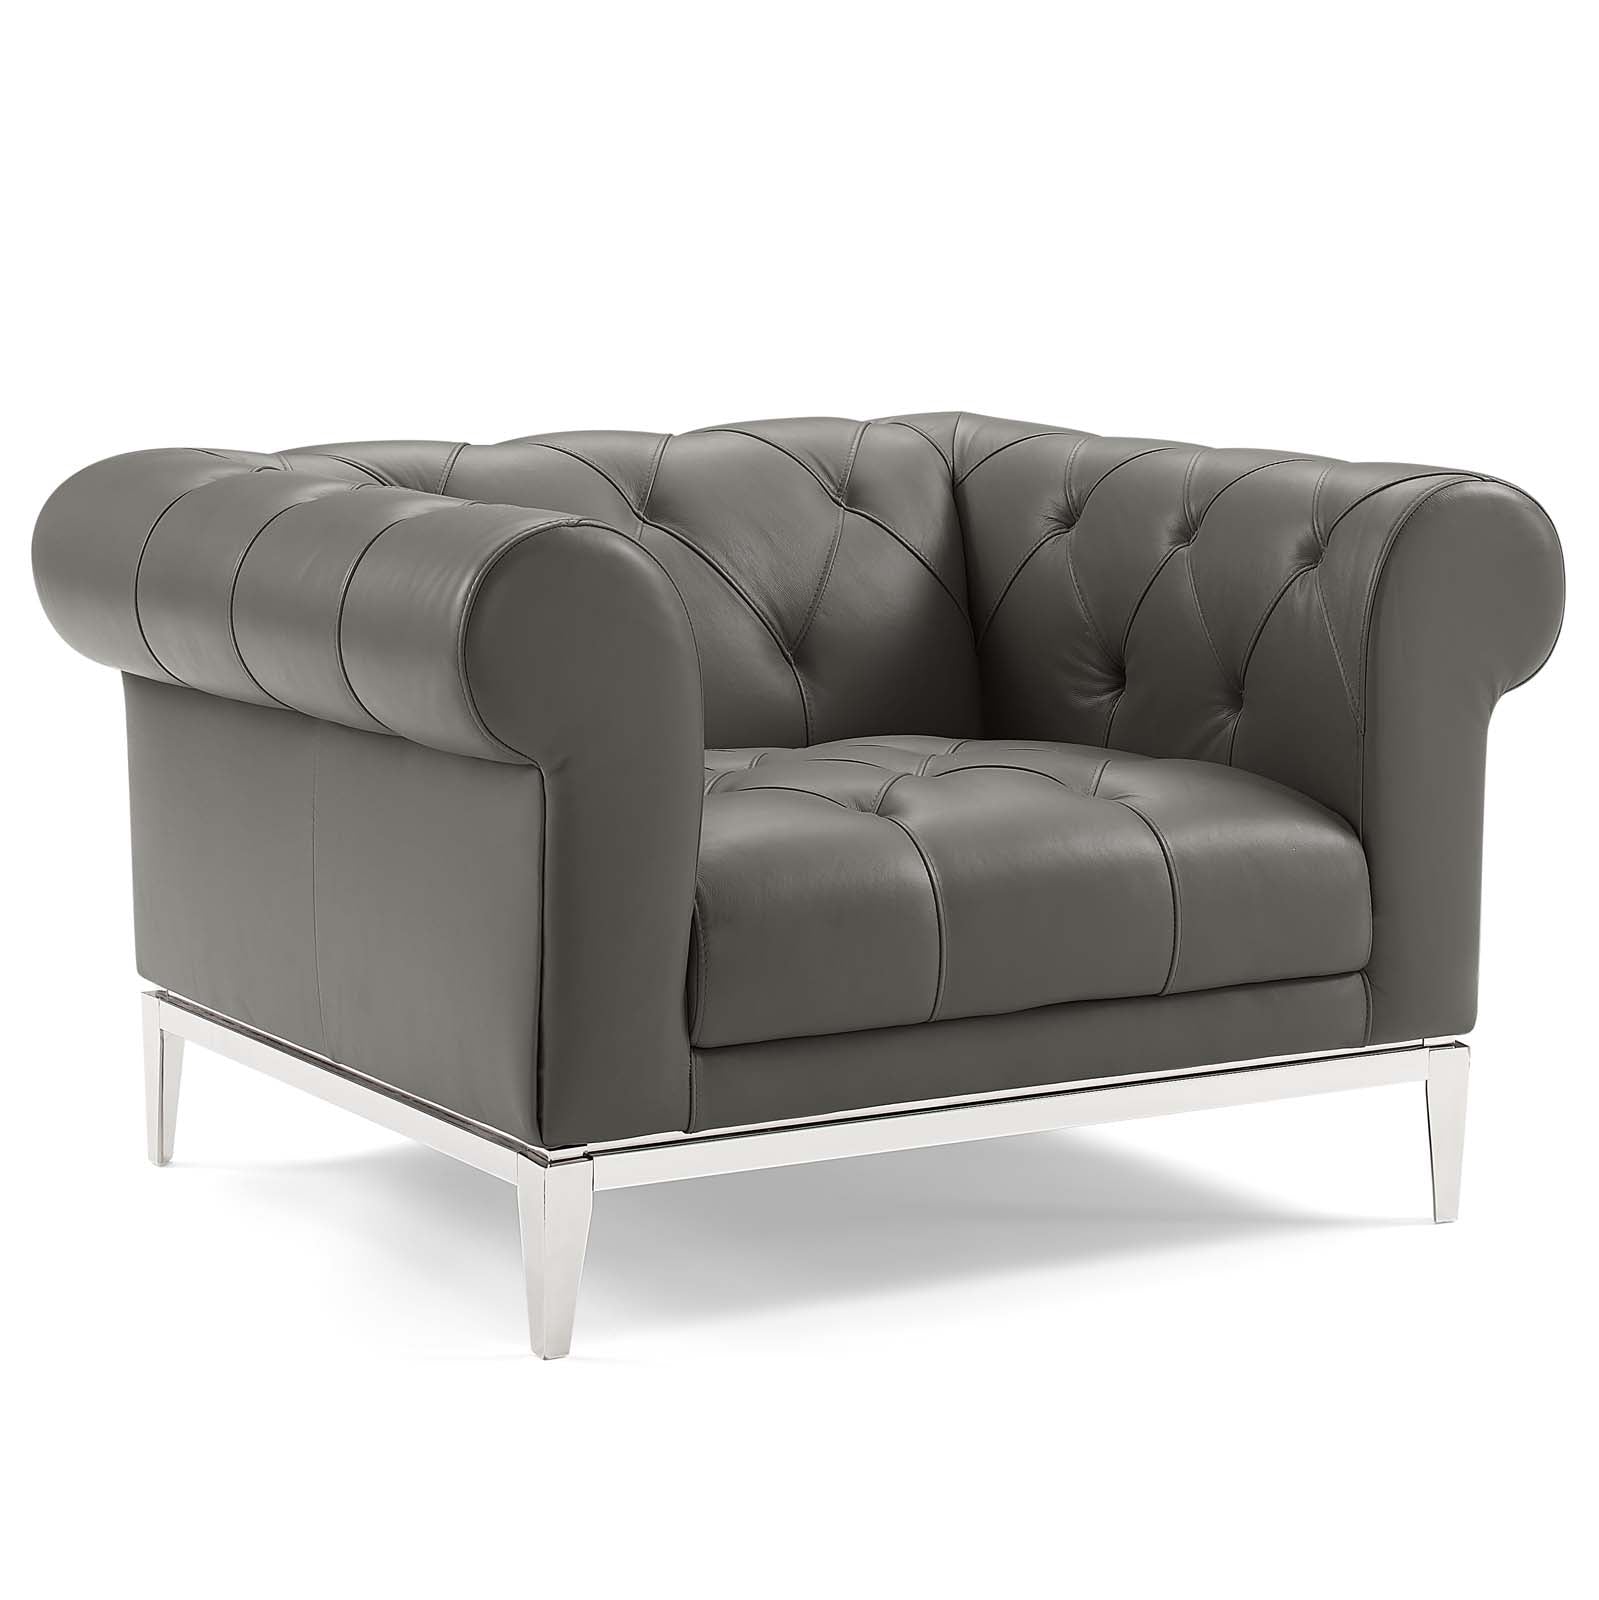 Modway Loveseats - Idyll-Tufted-Upholstered-Leather-Loveseat-and-Armchair-Gray